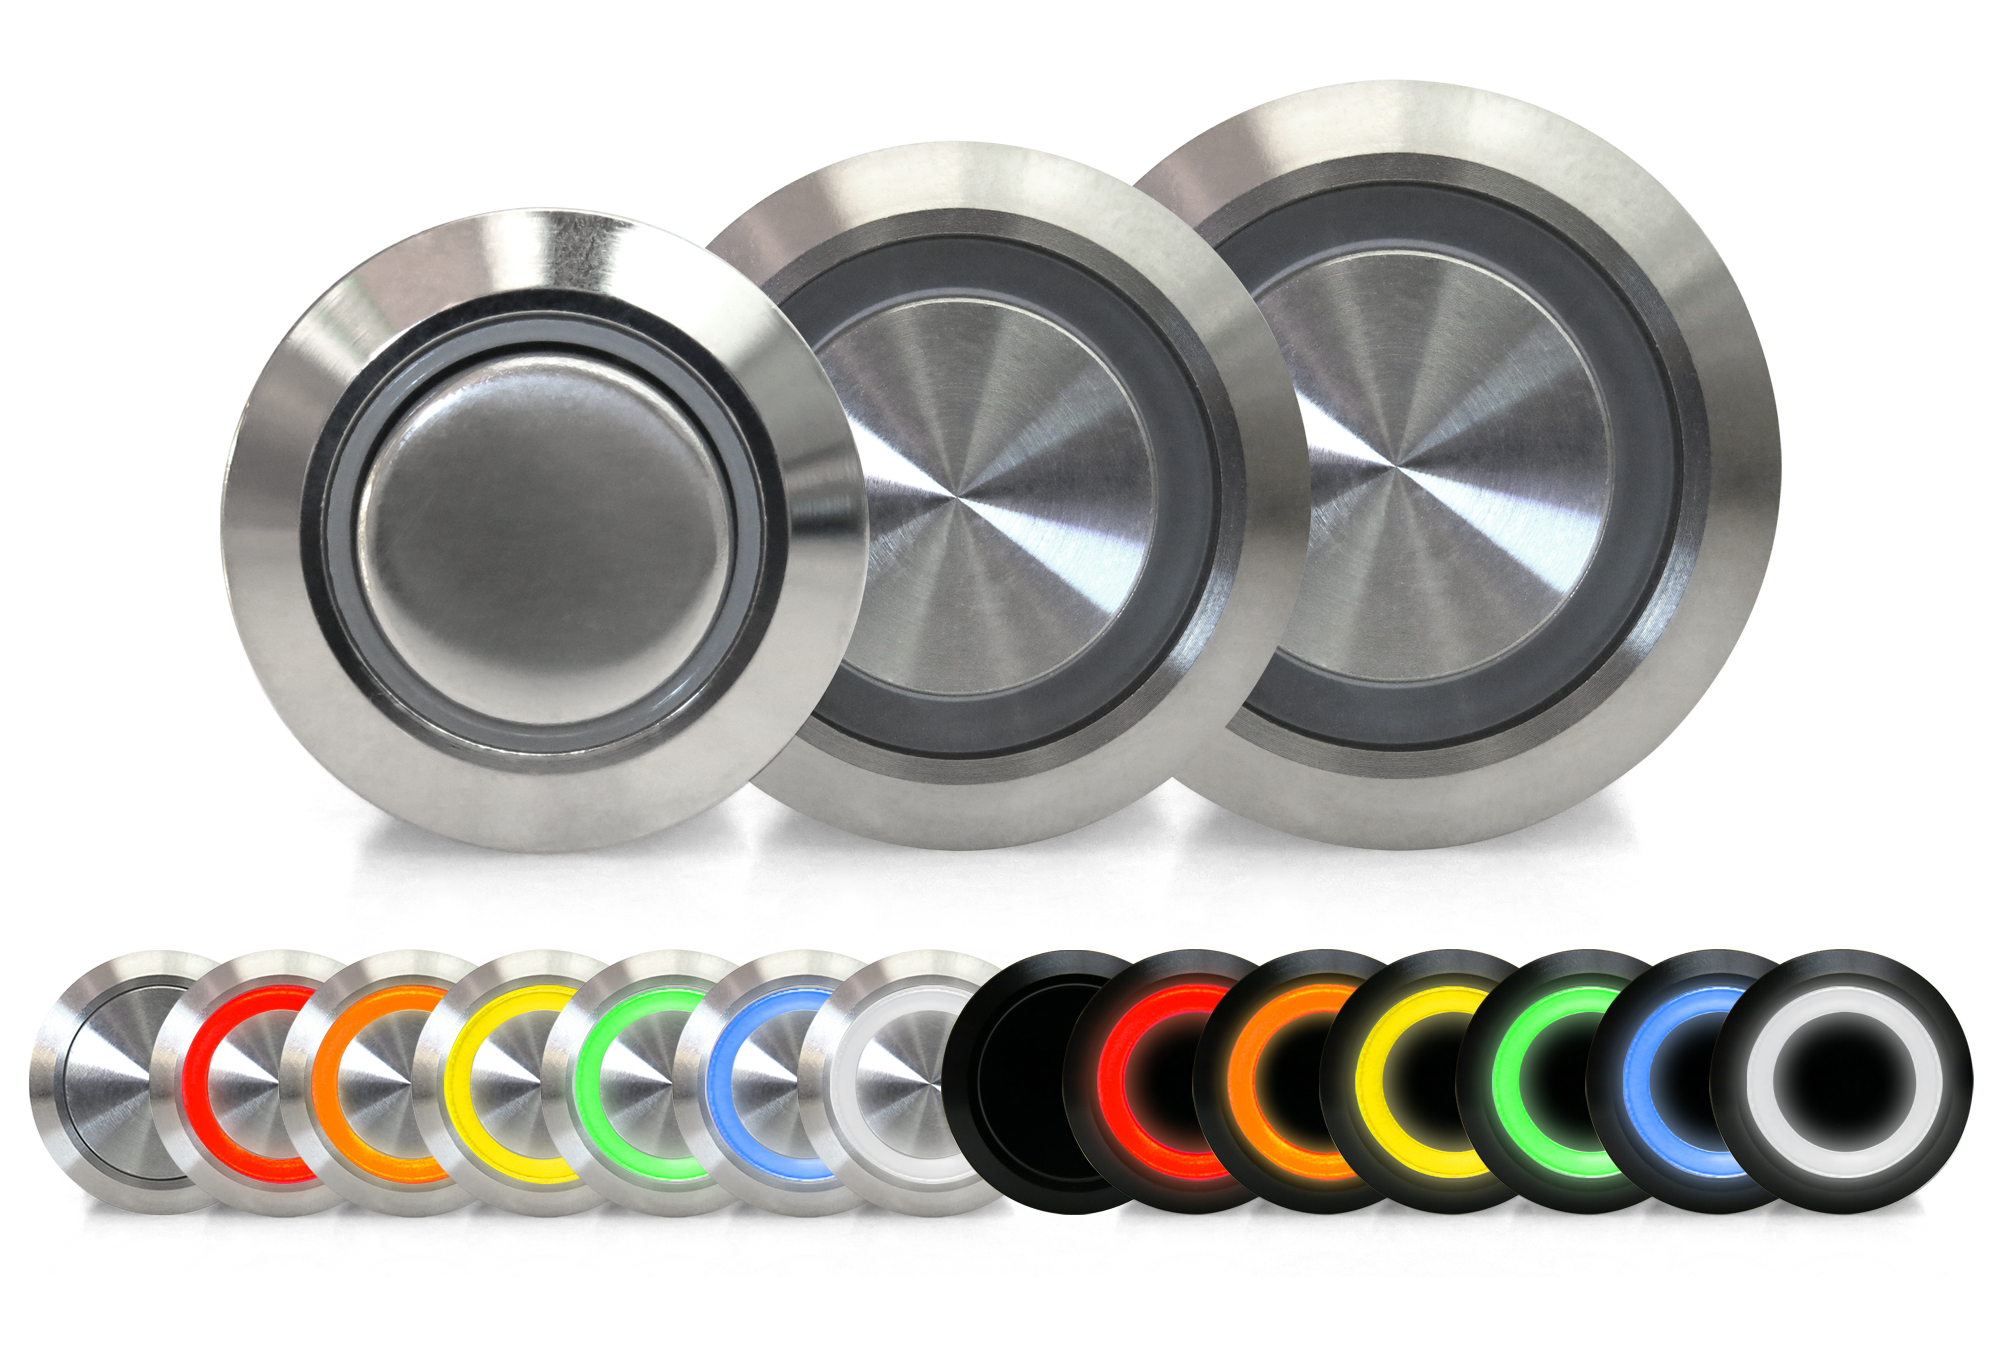 Billet Buttons in Silver and Black with Illumination Colors